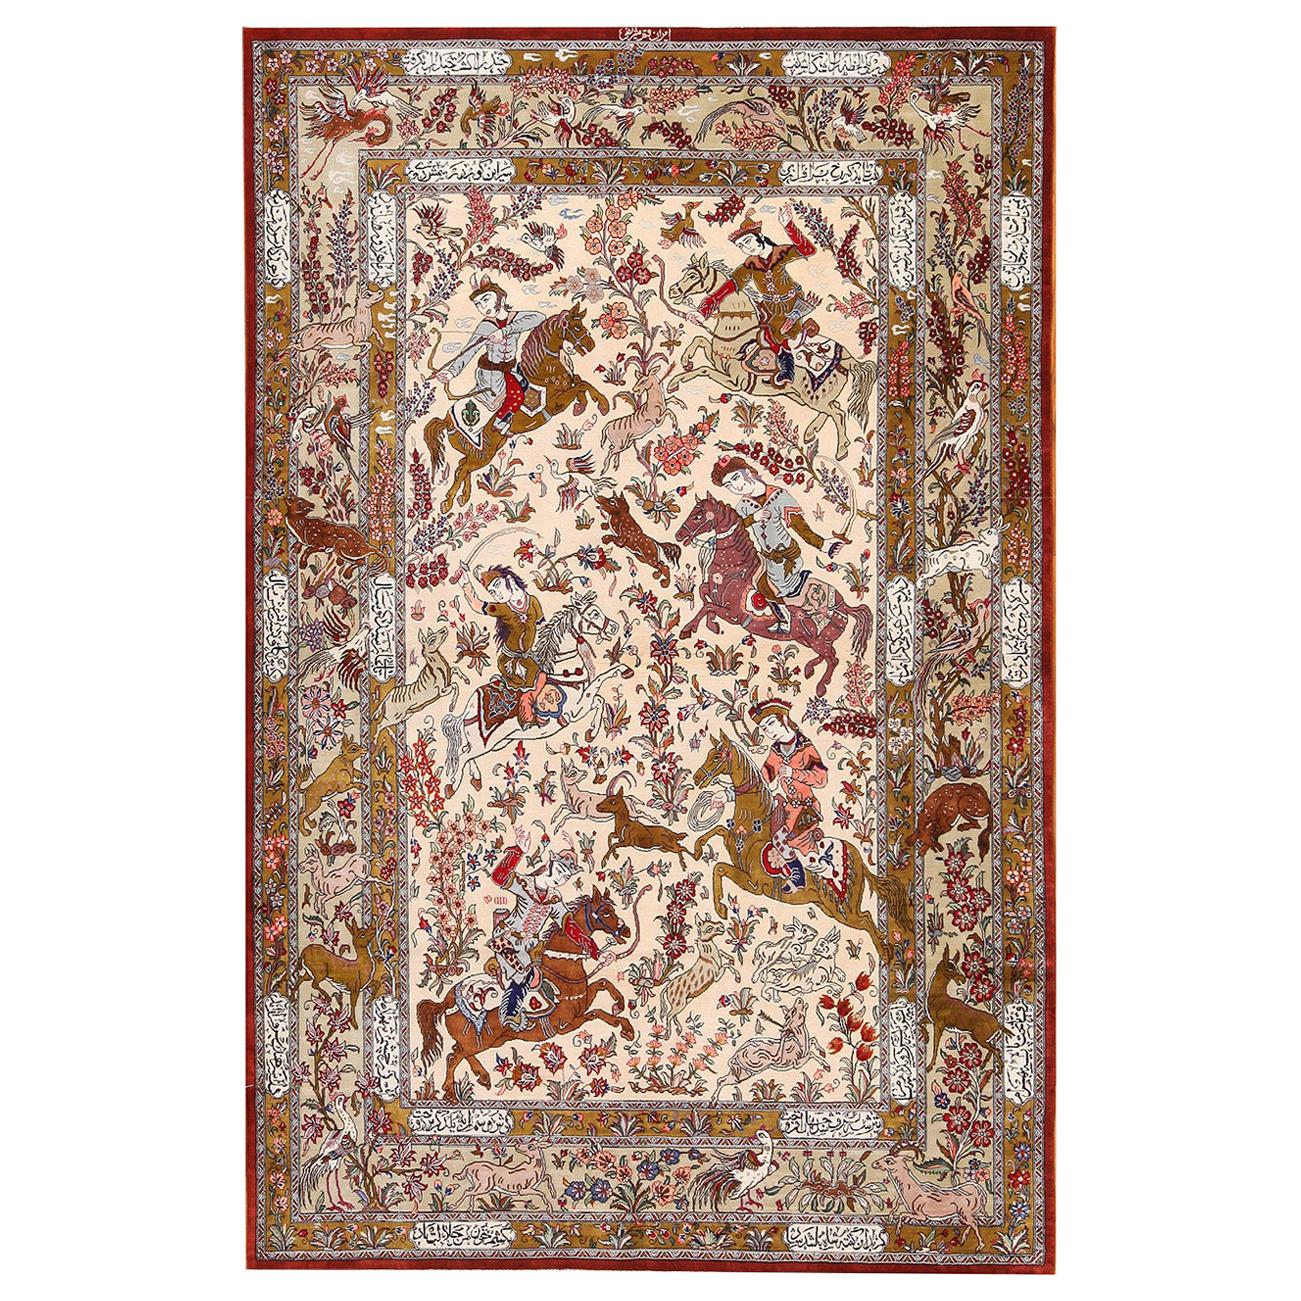 Nazmiyal Collection Silk Vintage Persian Qum Rug. 4 ft 3 in x 6 ft 4 in